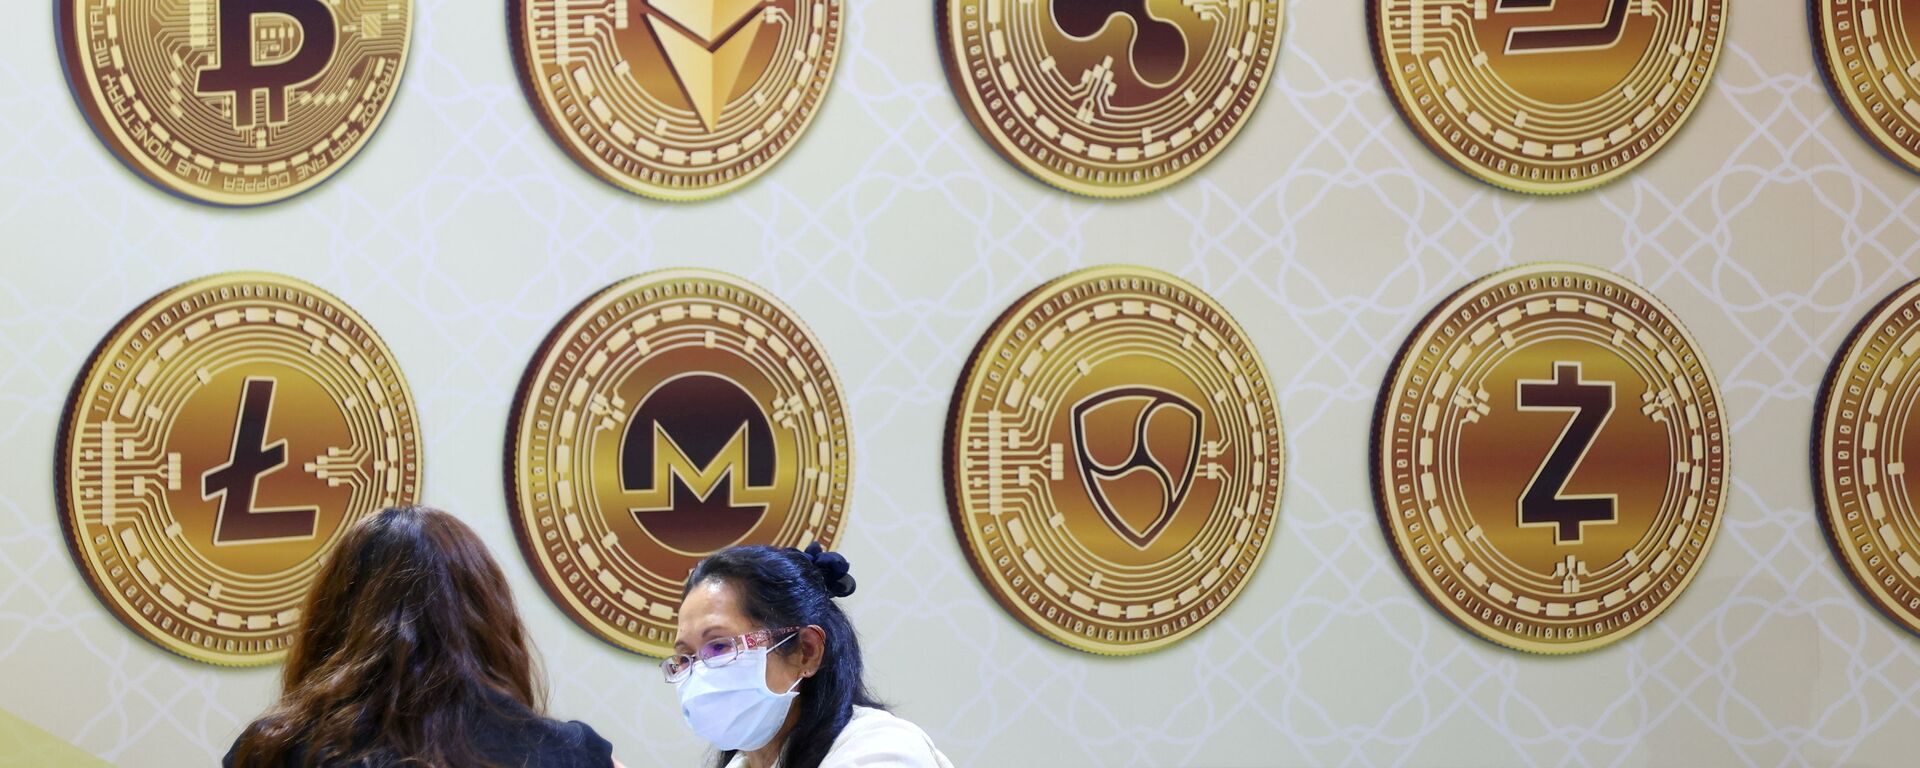 Customers talk against a backboard with signs of cryptocurrency during 2020 Taipei International Finance Expo in Taipei, Taiwan, November 27, 2020. REUTERS/Ann Wang/File Photo - Sputnik International, 1920, 05.10.2021